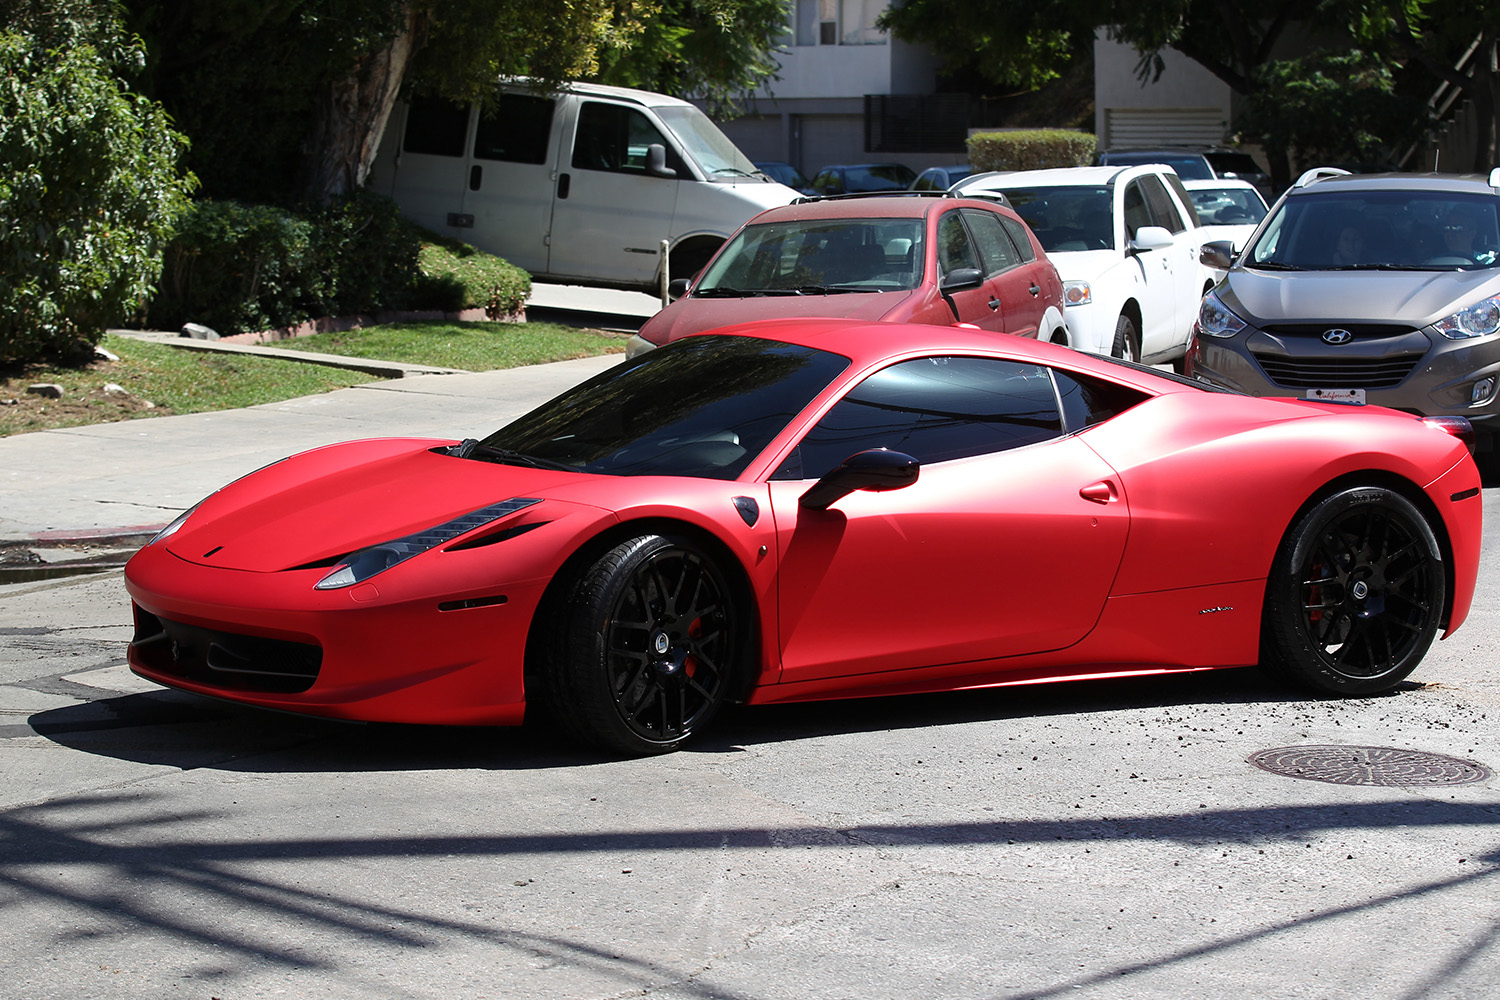 Justin Bieber spotted driving his matte red Ferrari 458 in Hollywood